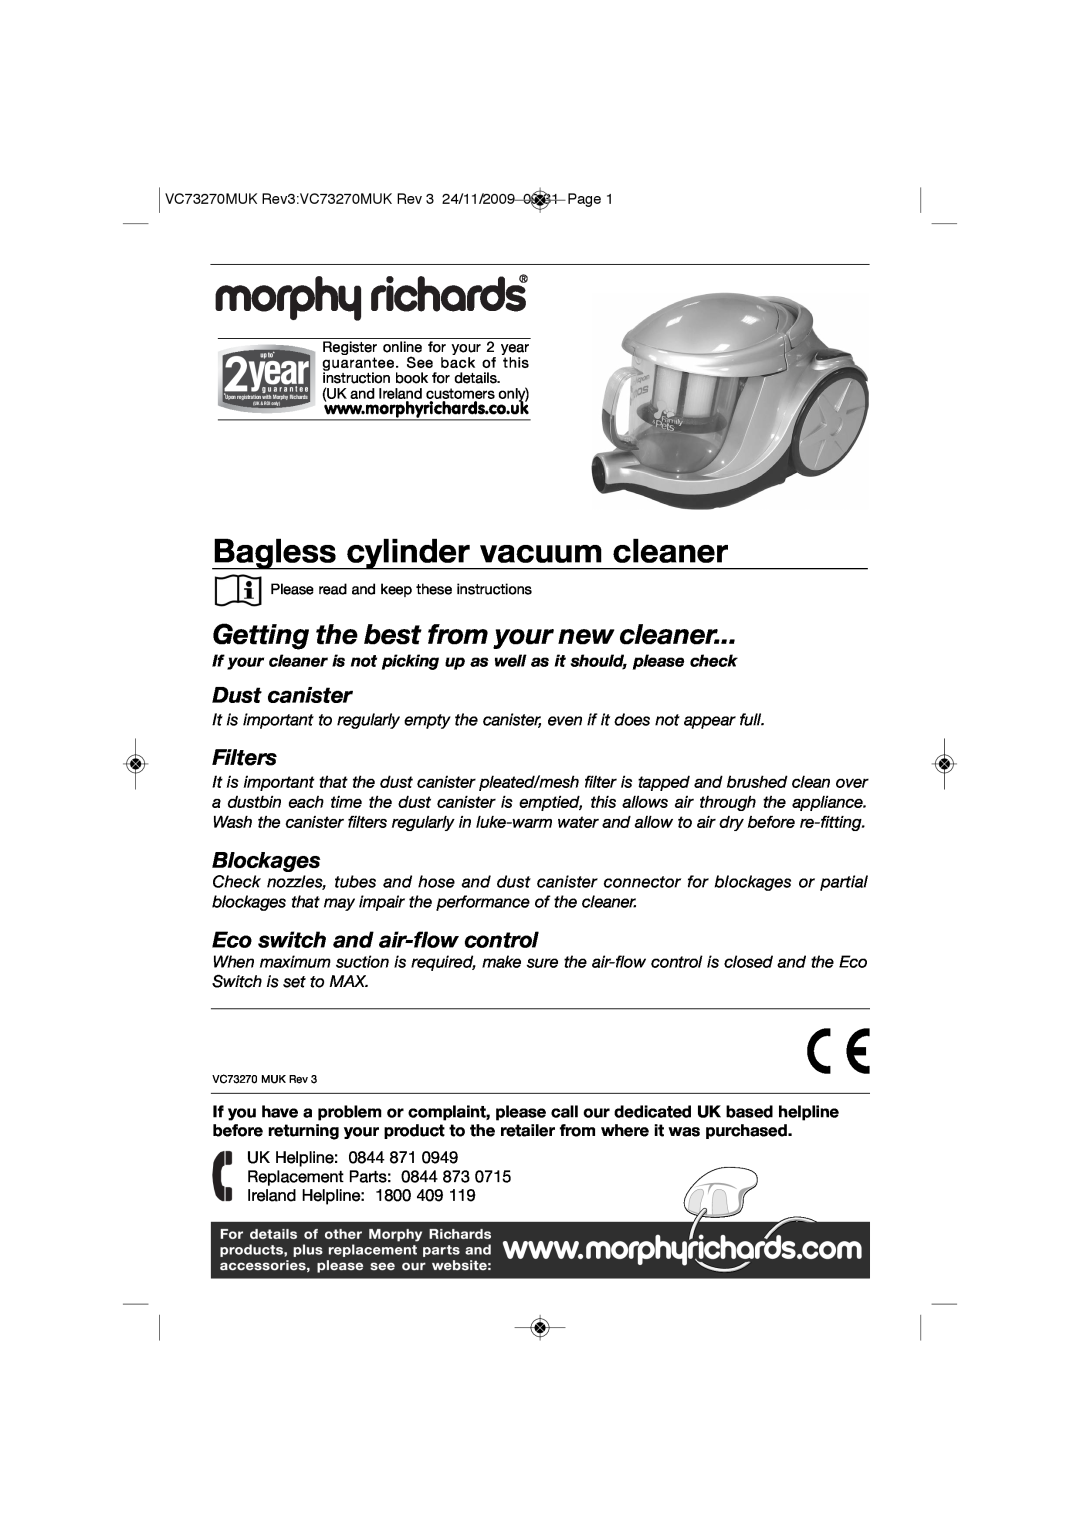 Morphy Richards VC73270 manual Bagless cylinder vacuum cleaner, Getting the best from your new cleaner, Dust canister 